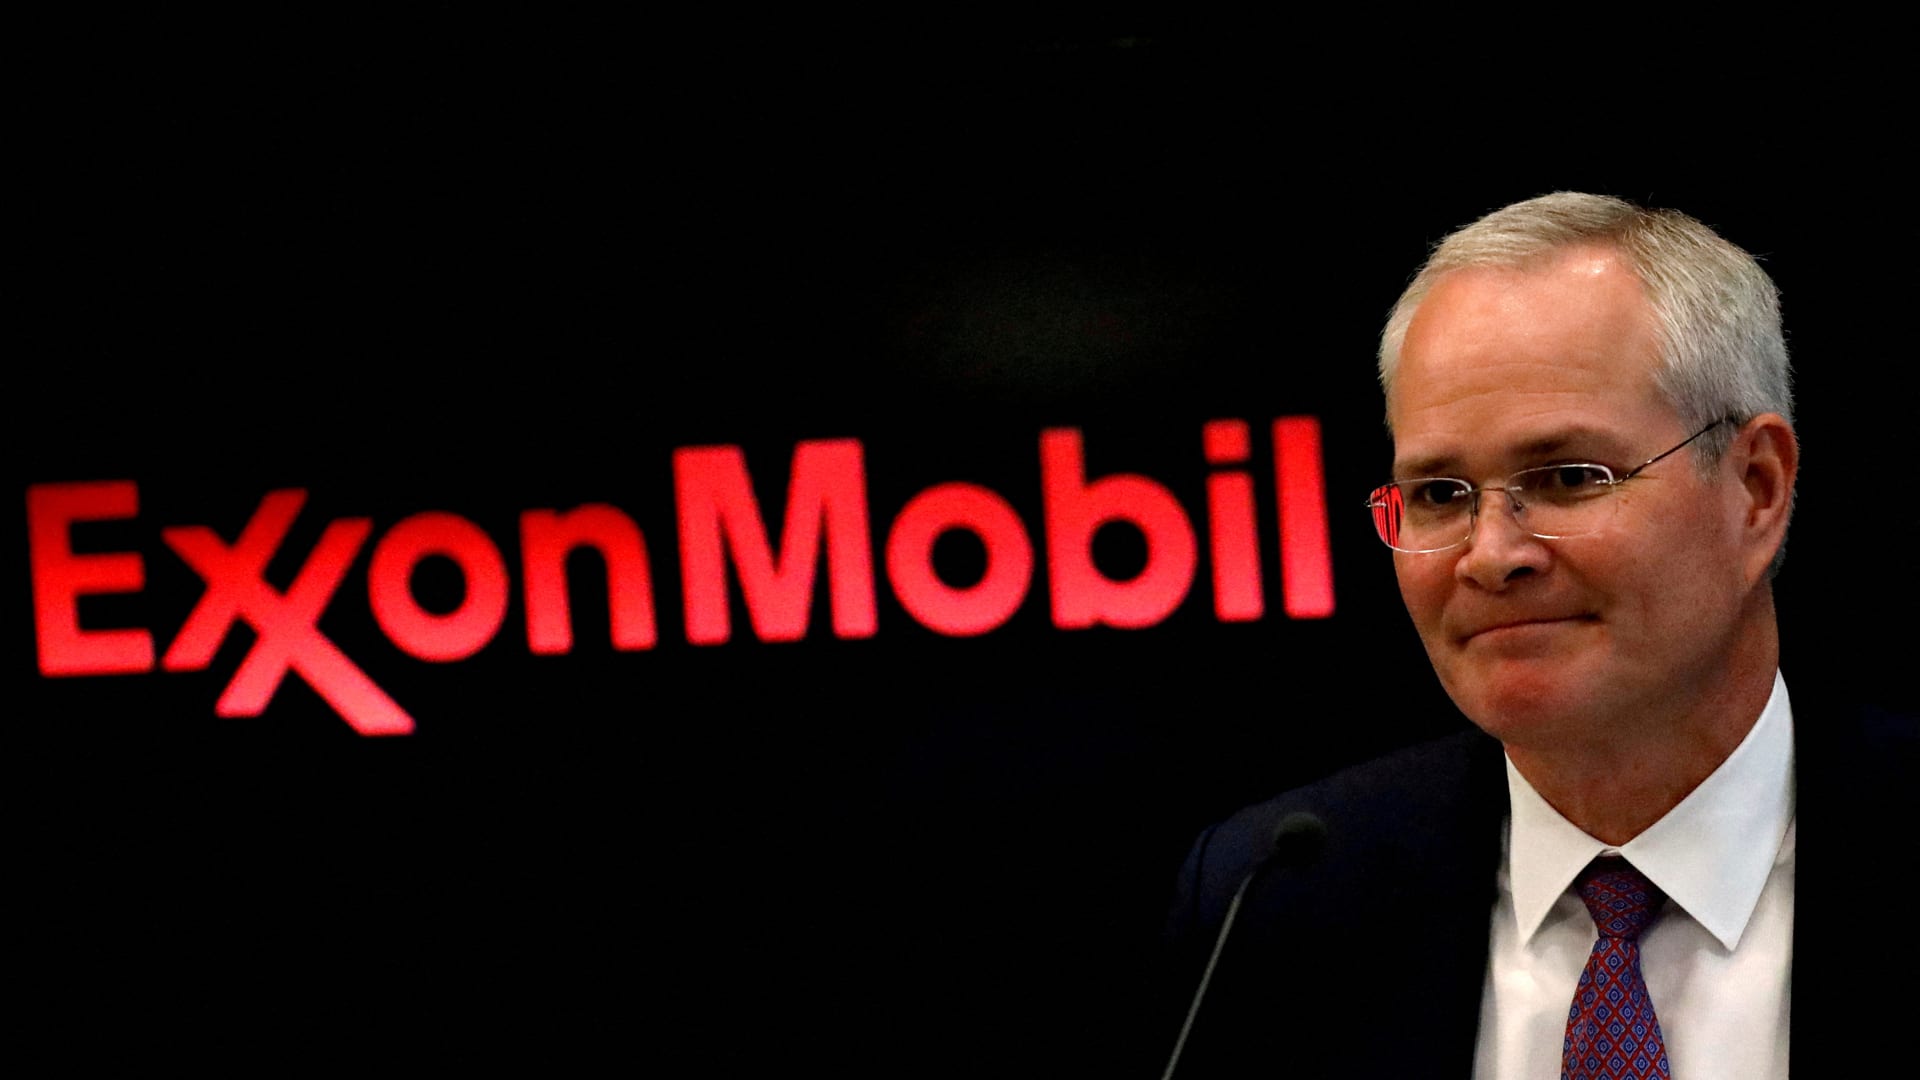 Exxon sees big earnings boost from cost cuts, will increase share buybacks after Pioneer deal closes